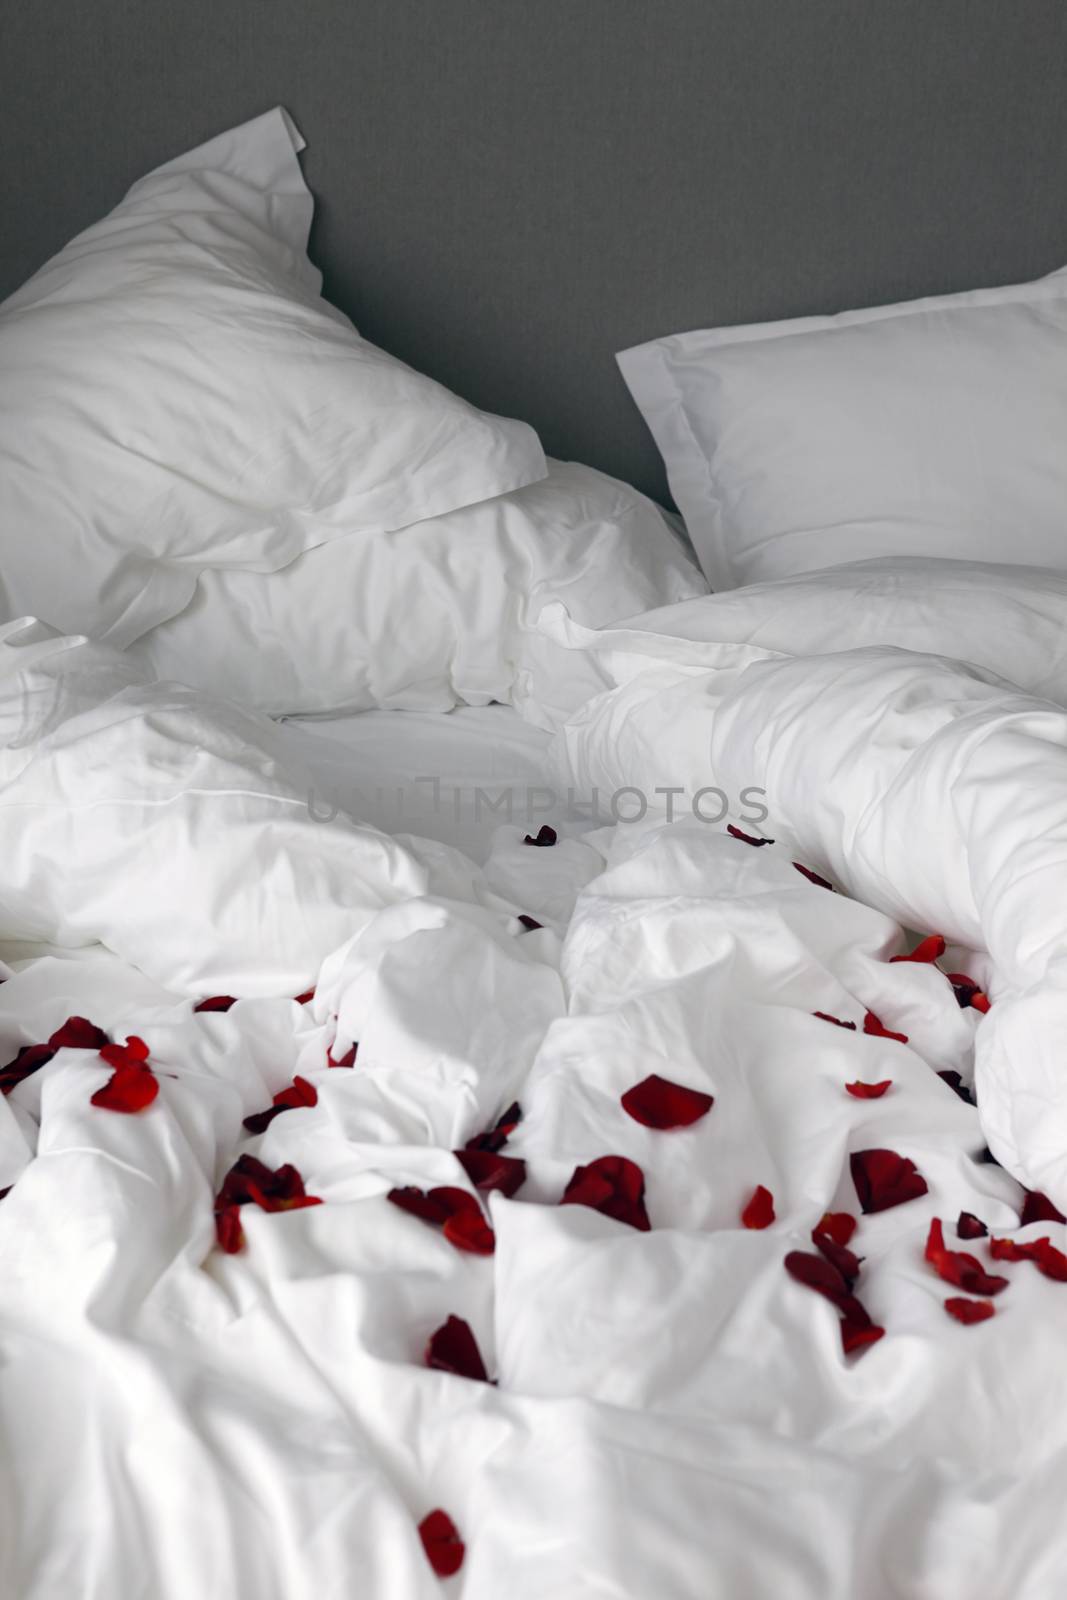 Not the laid bed with rose petals